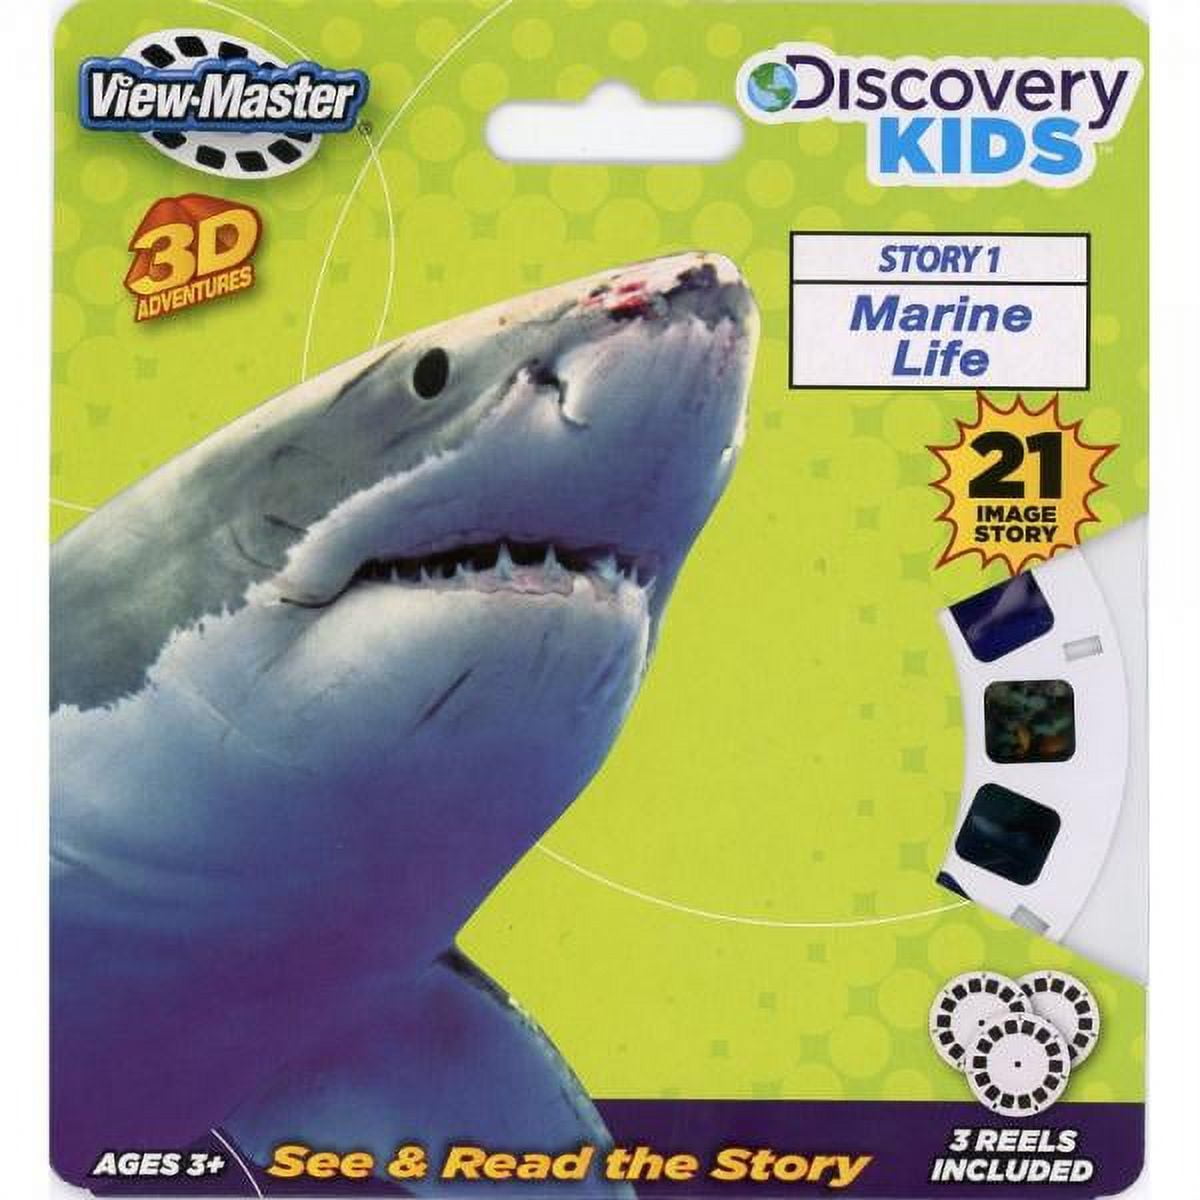 View-Master Discovery Kids 3D Marine Life Toy Viewfinder Reel